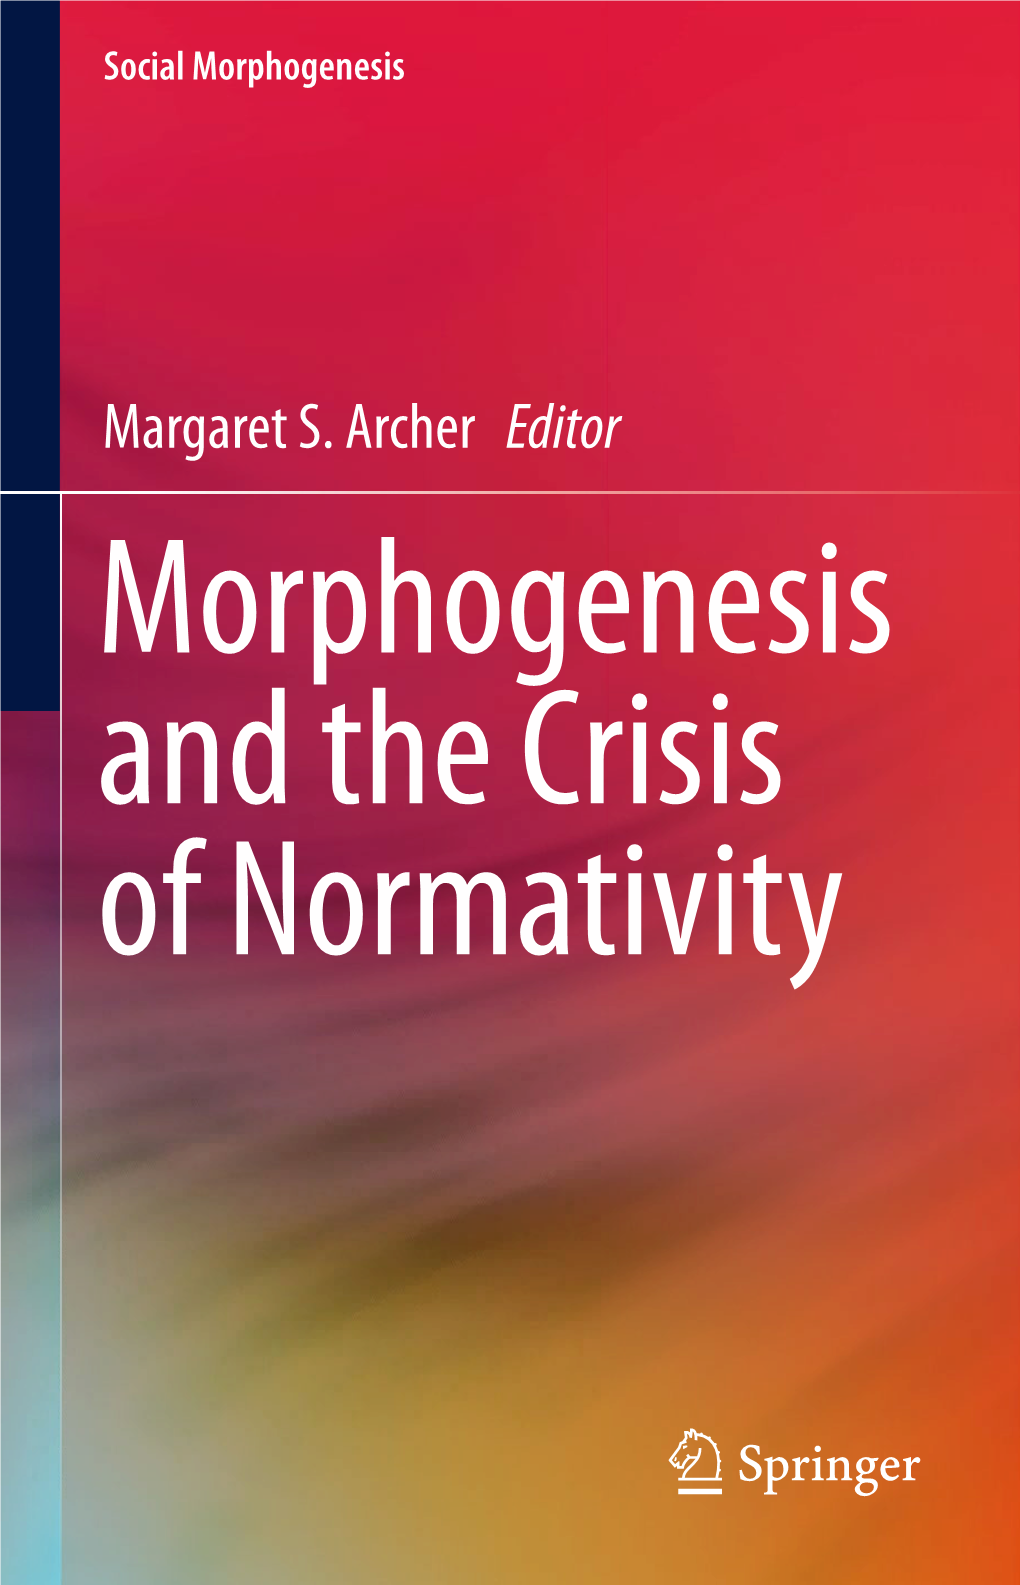 Margaret S. Archer Editor Morphogenesis and the Crisis of Normativity Morphogenesis and the Crisis of Normativity